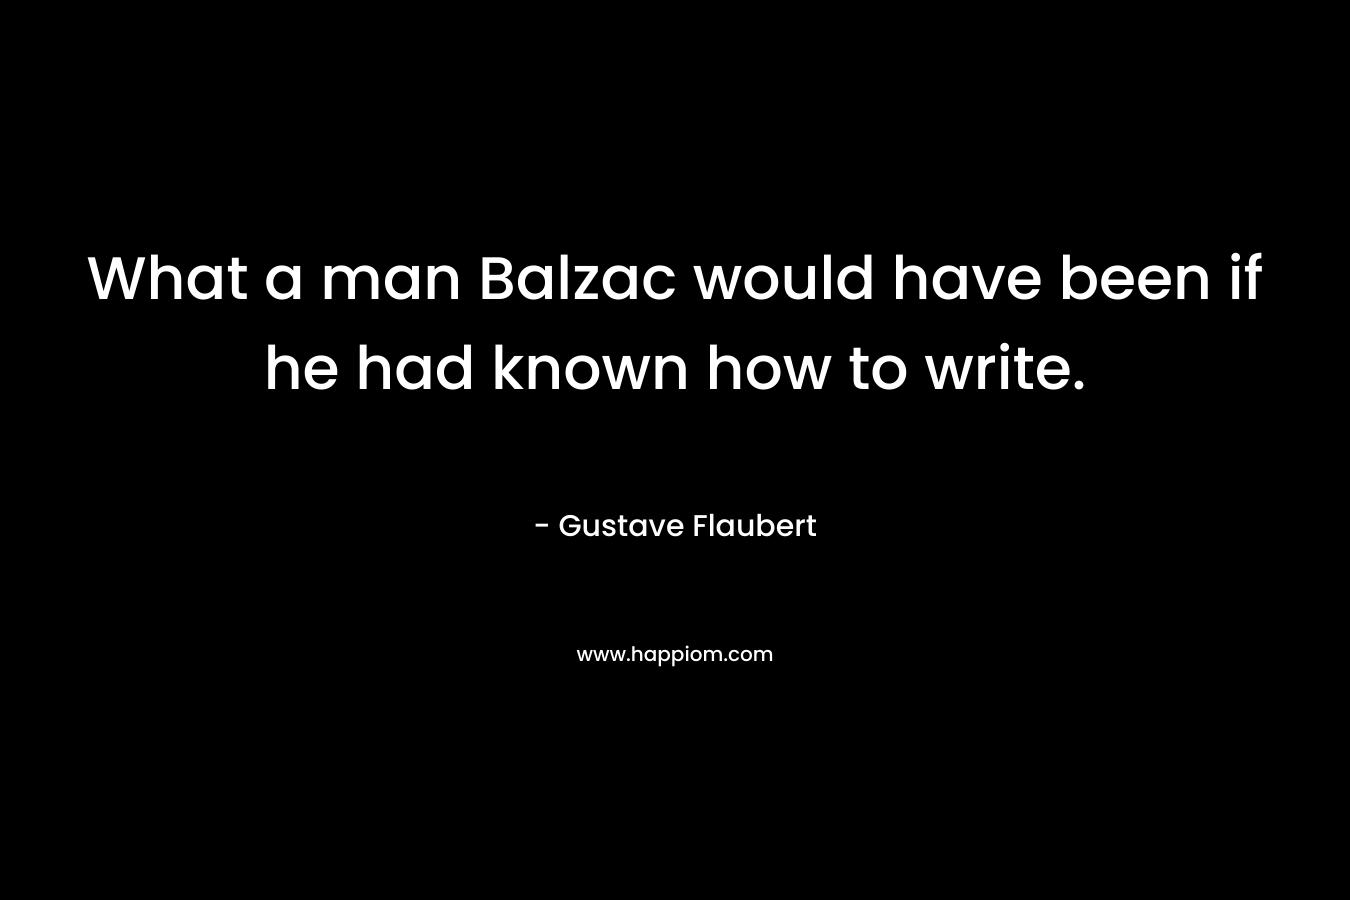 What a man Balzac would have been if he had known how to write. – Gustave Flaubert